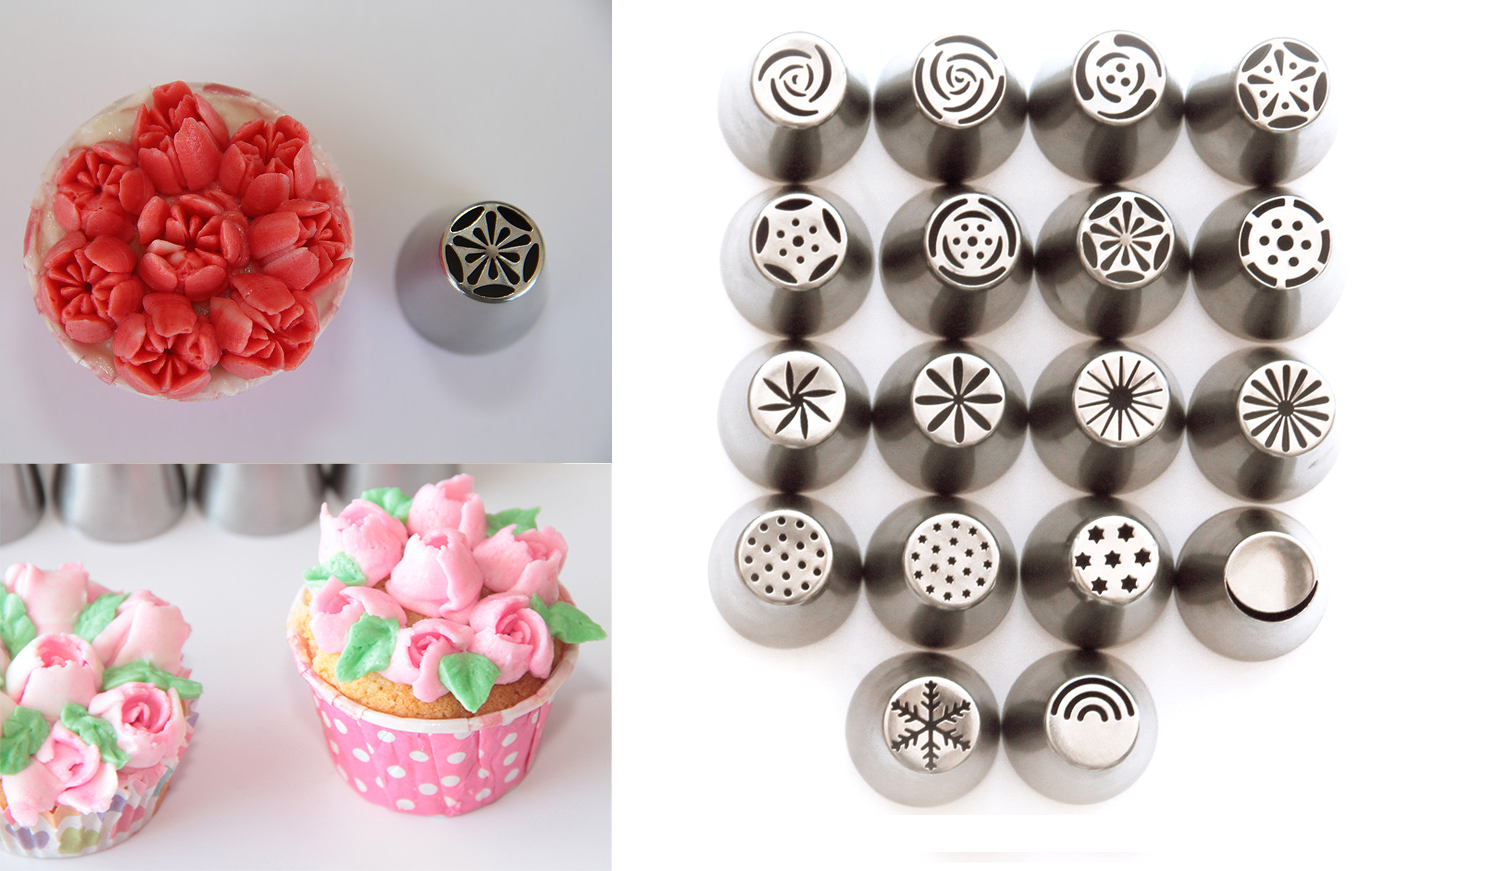 2016 best gadgets to decorate cake and cupcakes russian flower piping tips crownbake